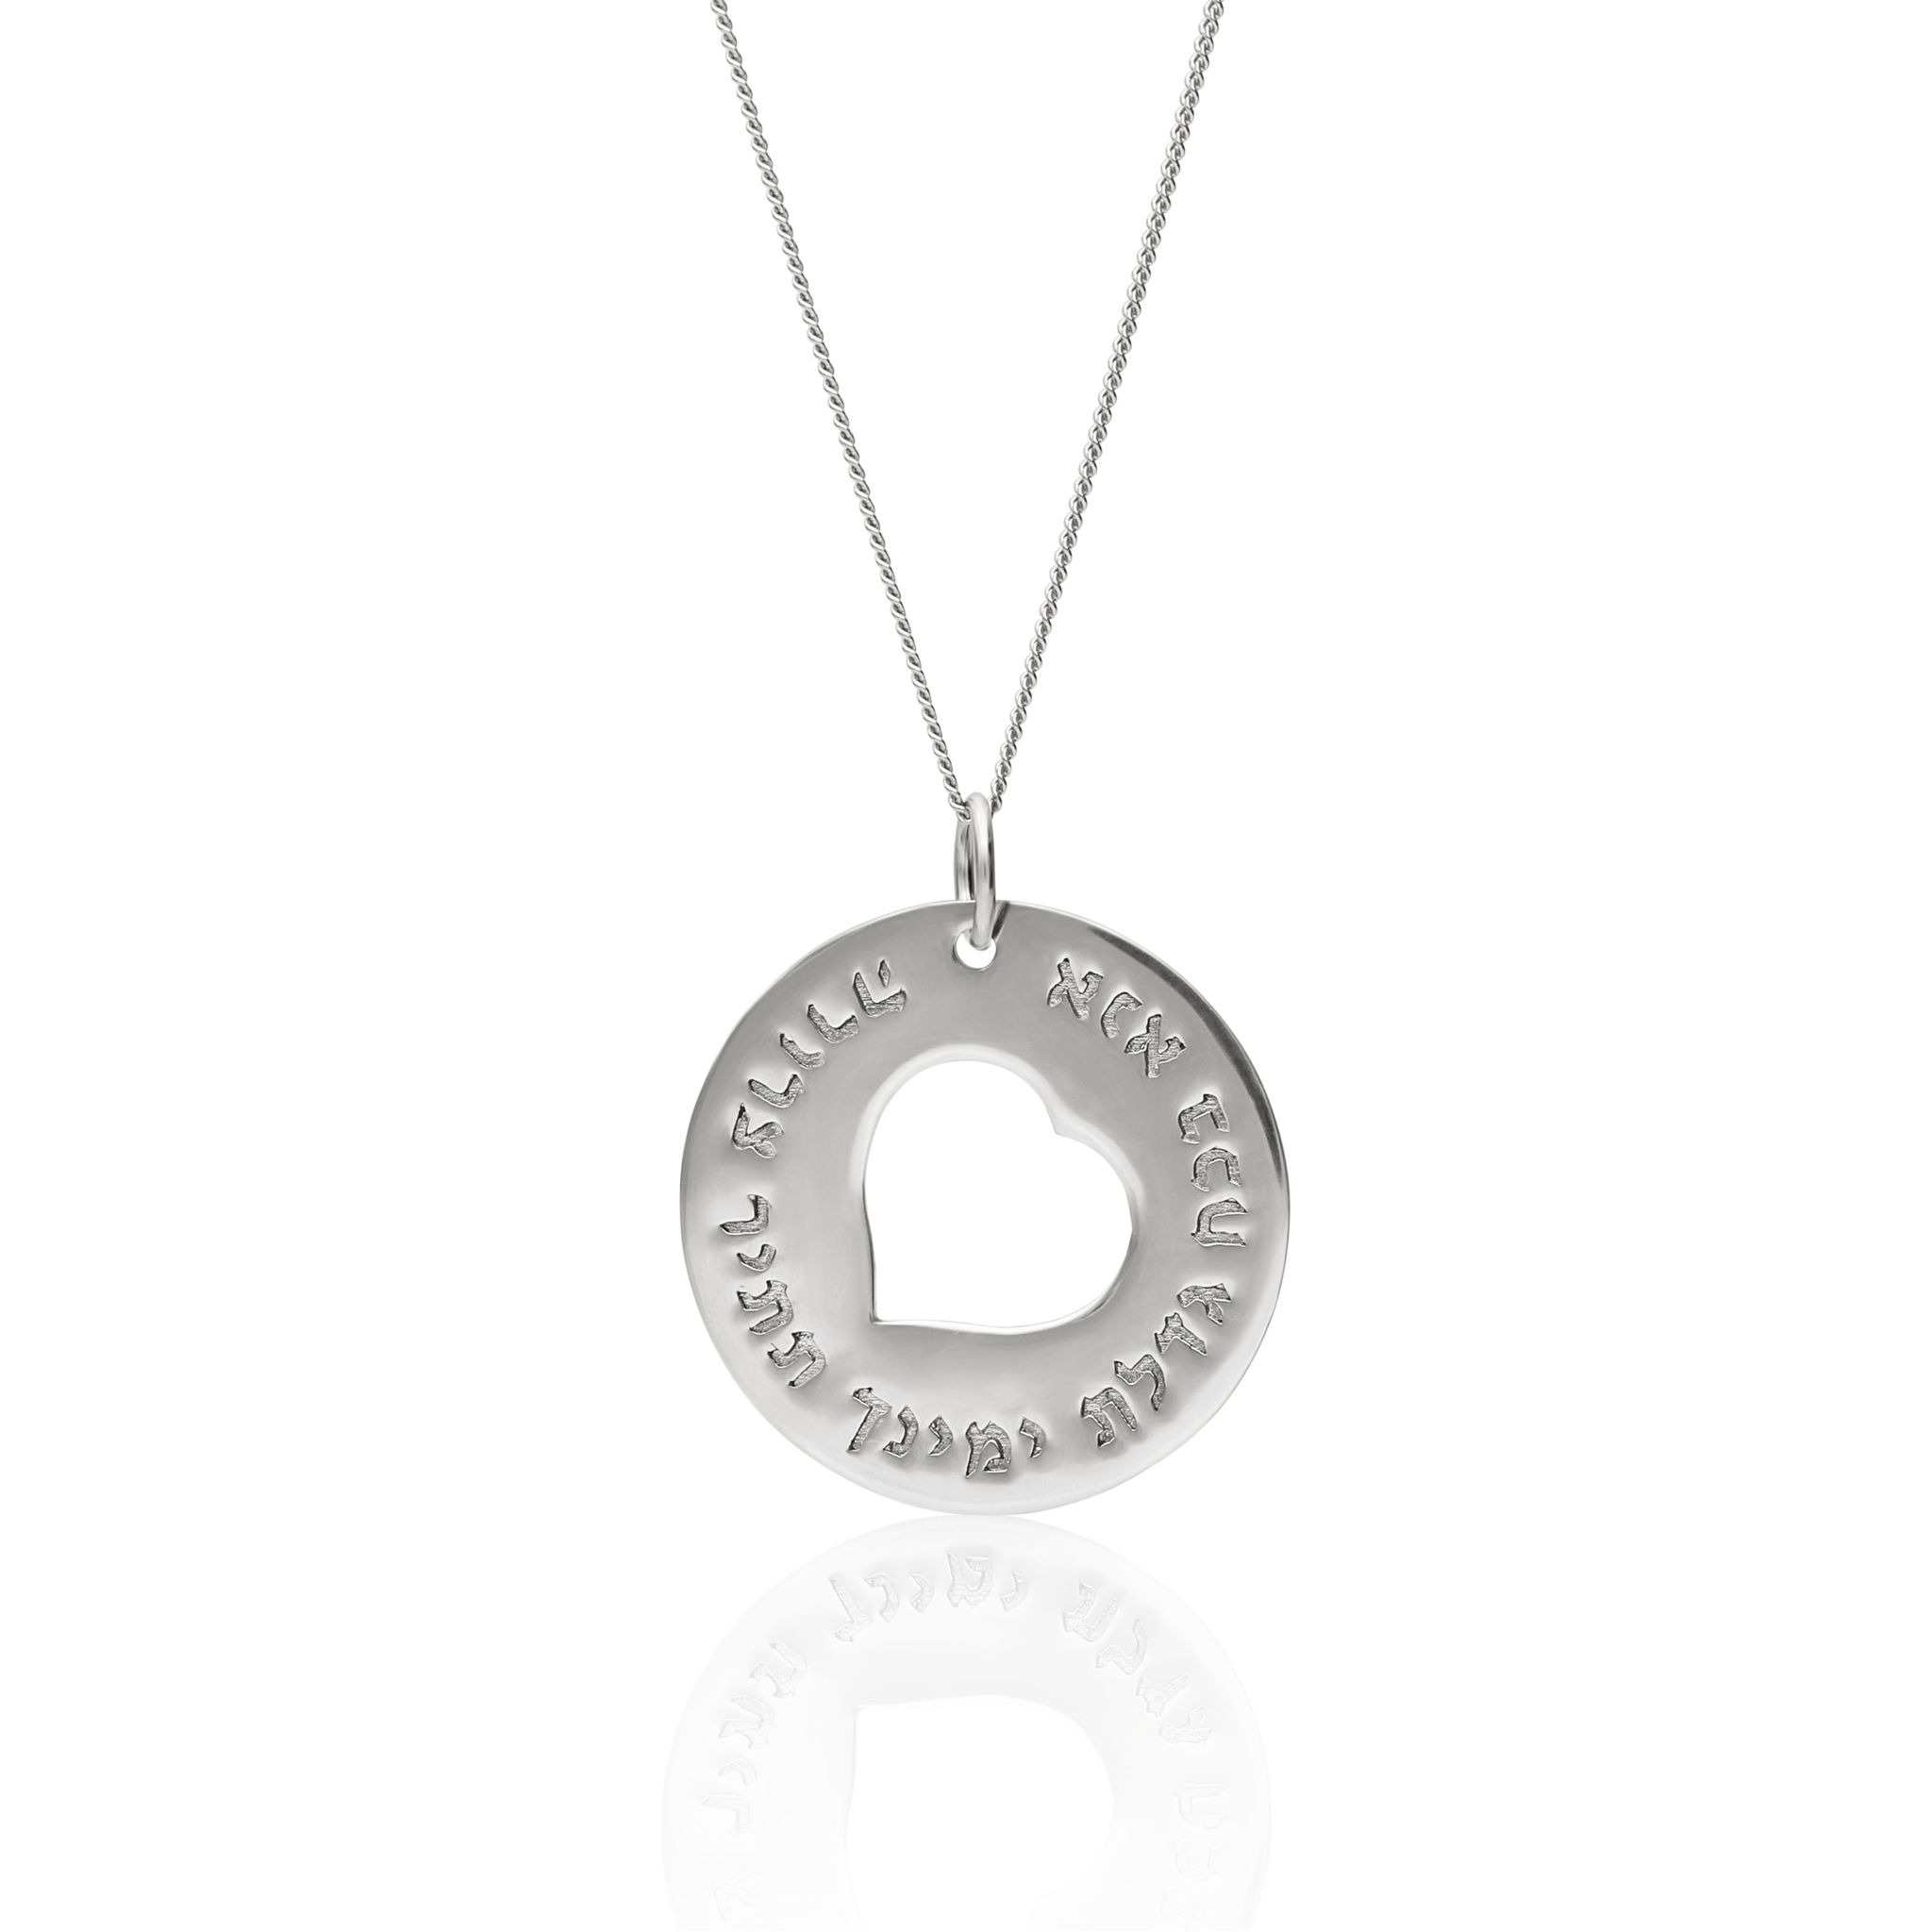 Heart of Israel Necklace - Silver (7243737104534)